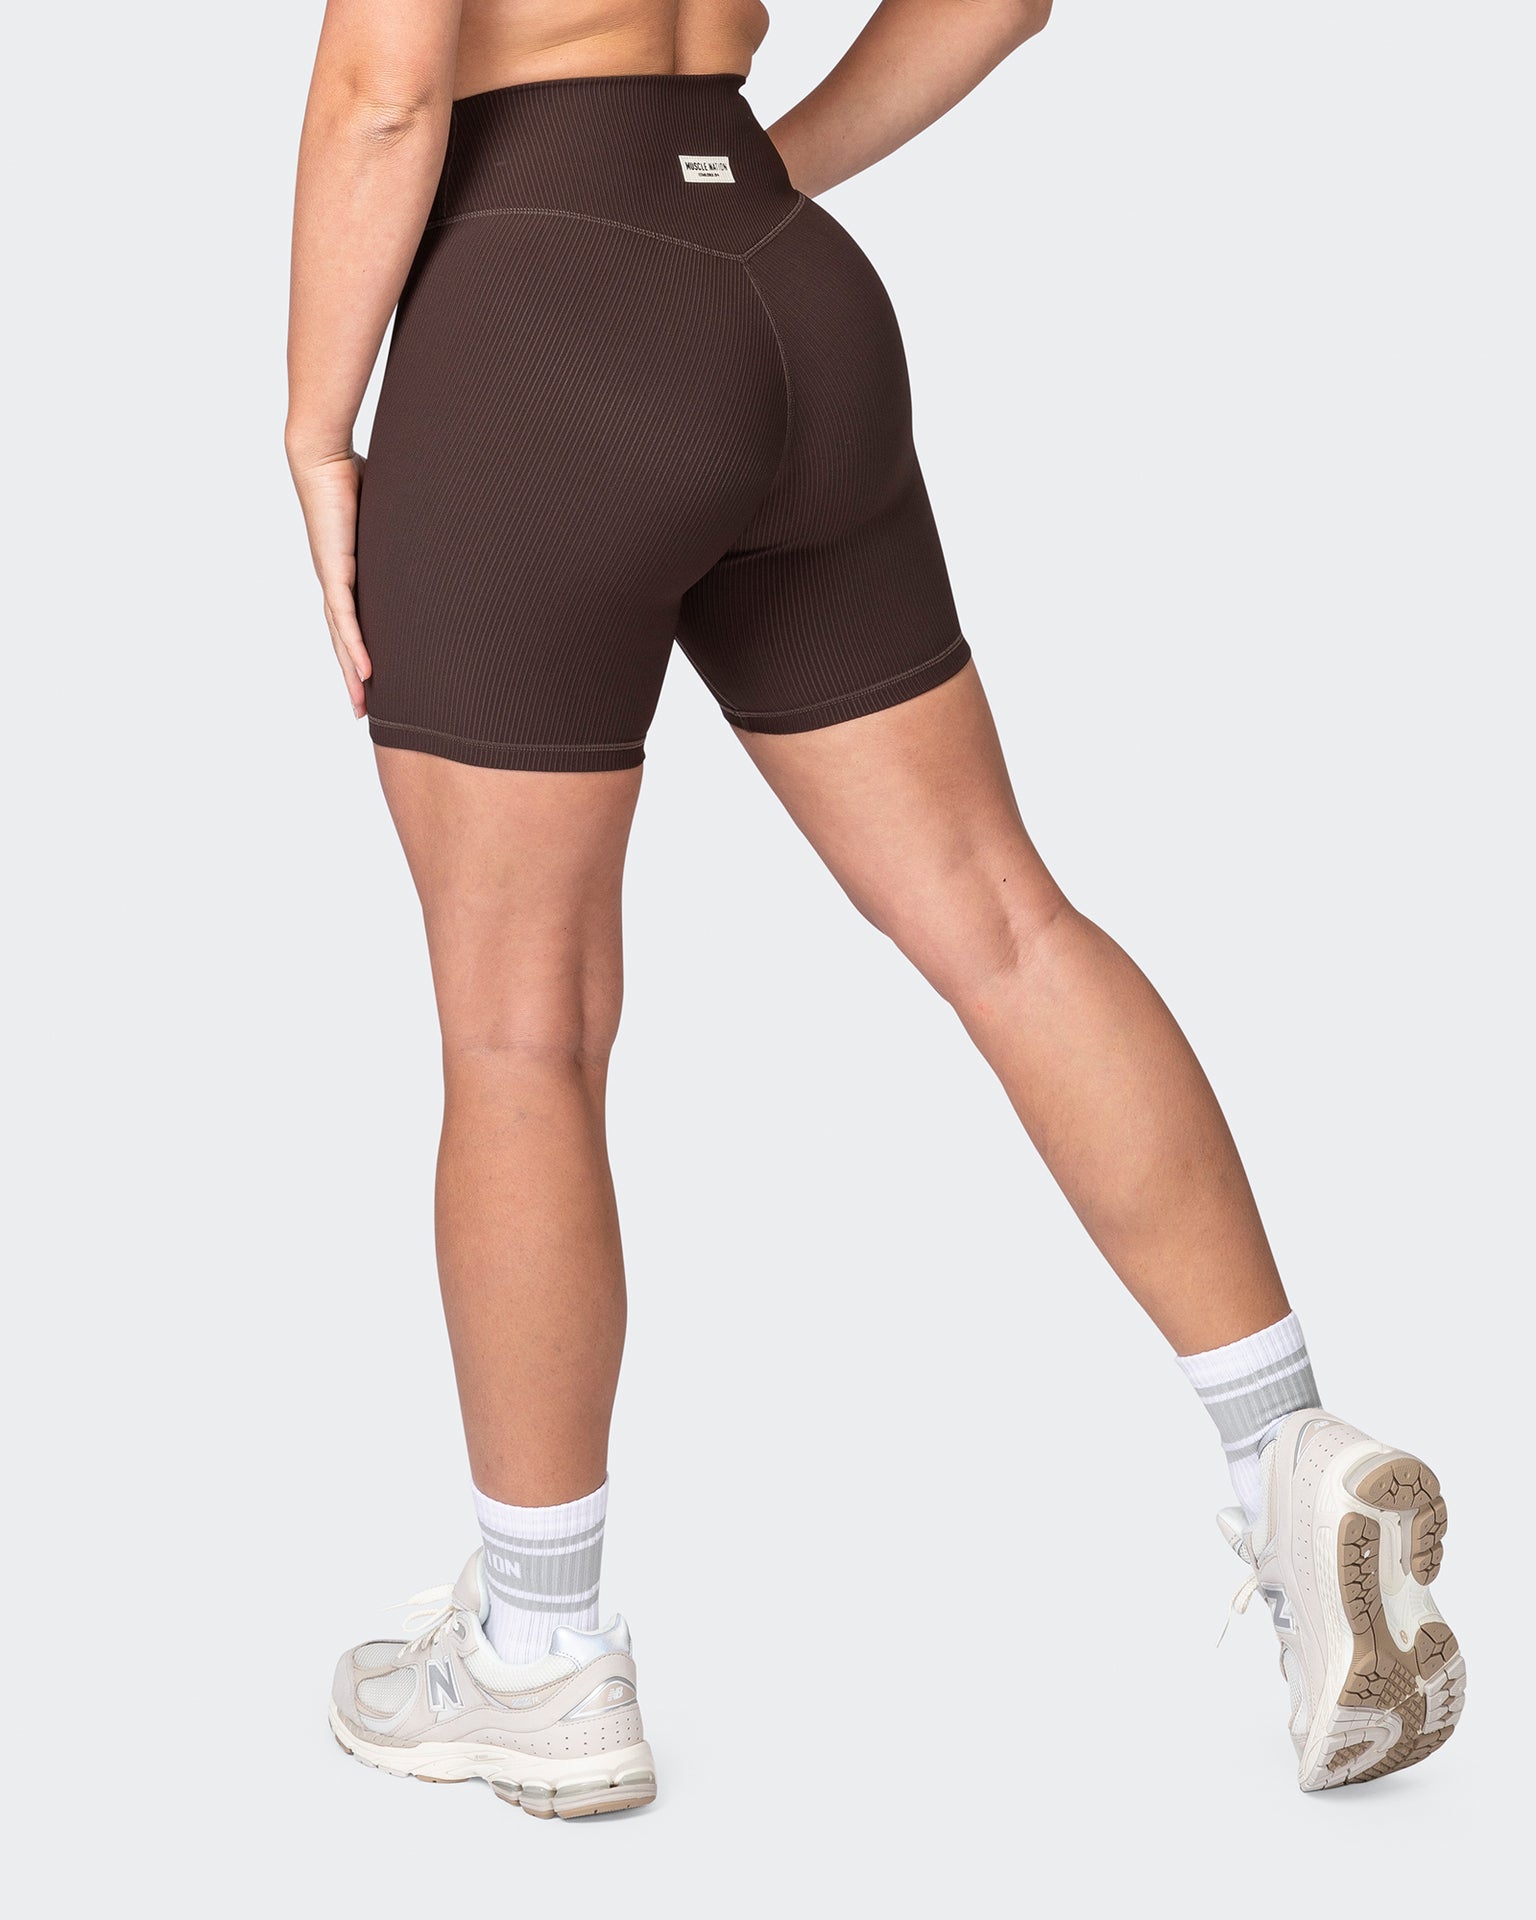 💕 Ribbed Bike Shorts at Costco! These high waist biker shorts are moi, biker shorts